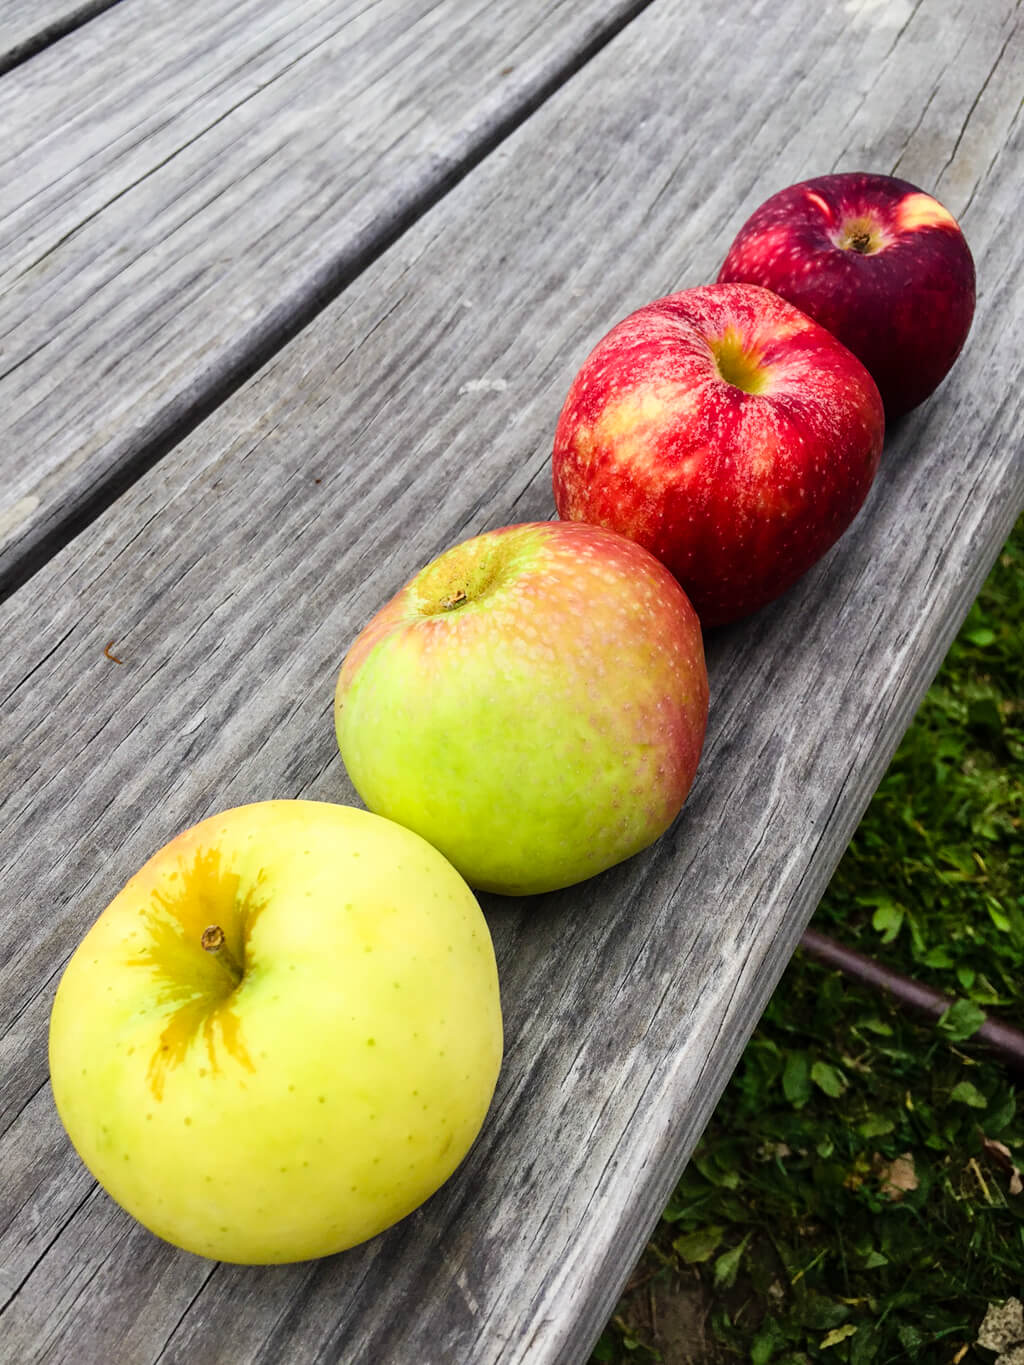 Apple colors: yellow, green, pink and red from Brightonwoods Apple Orchard